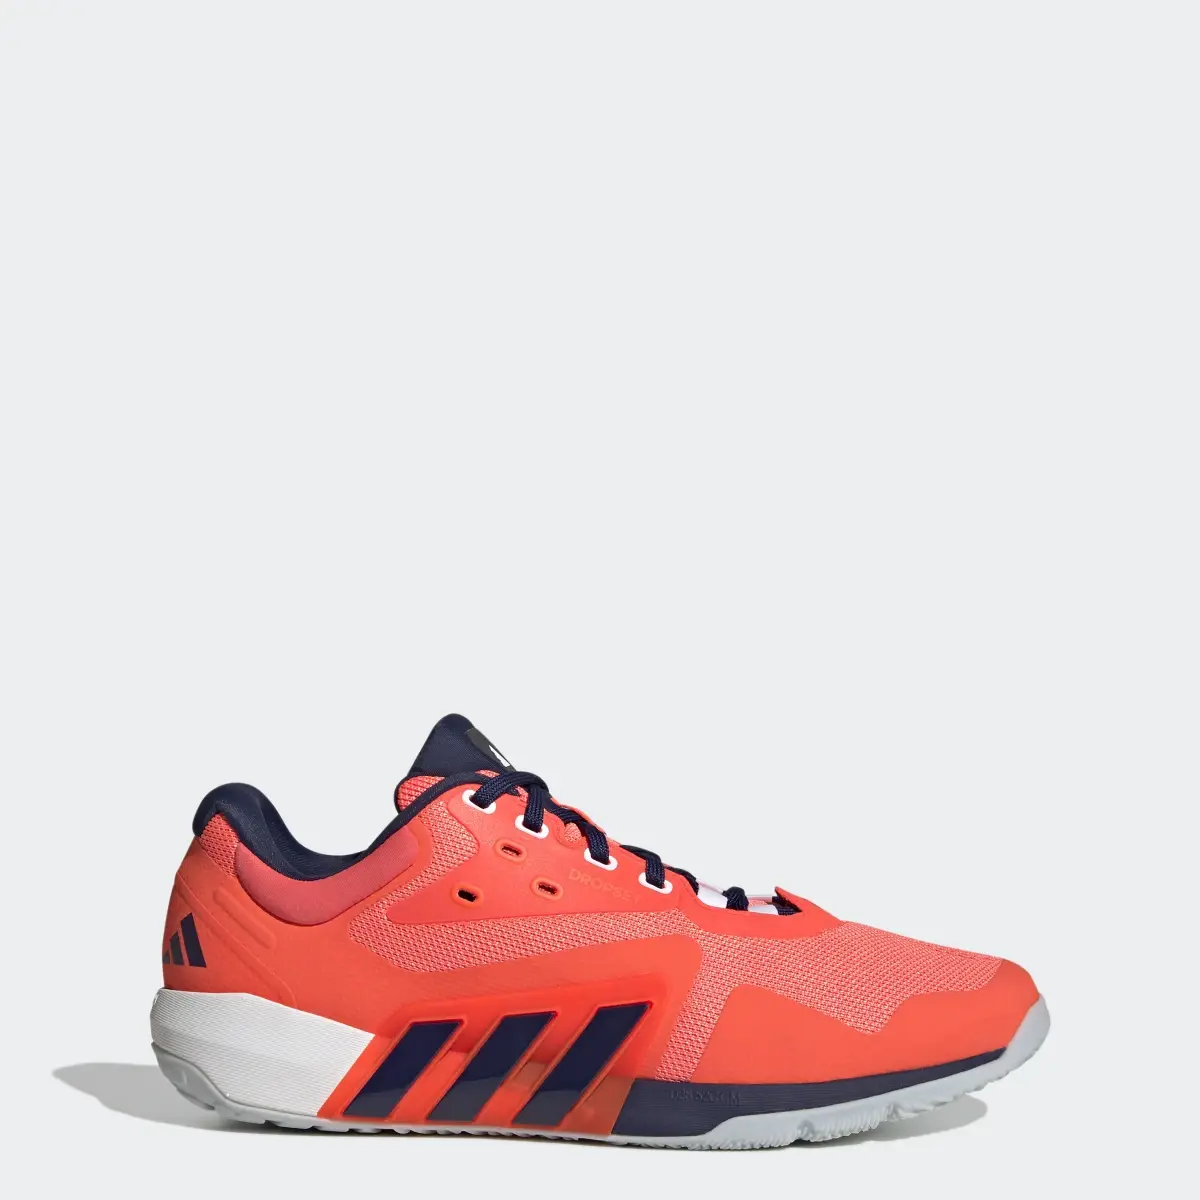 Adidas Dropset Trainer Shoes. 1